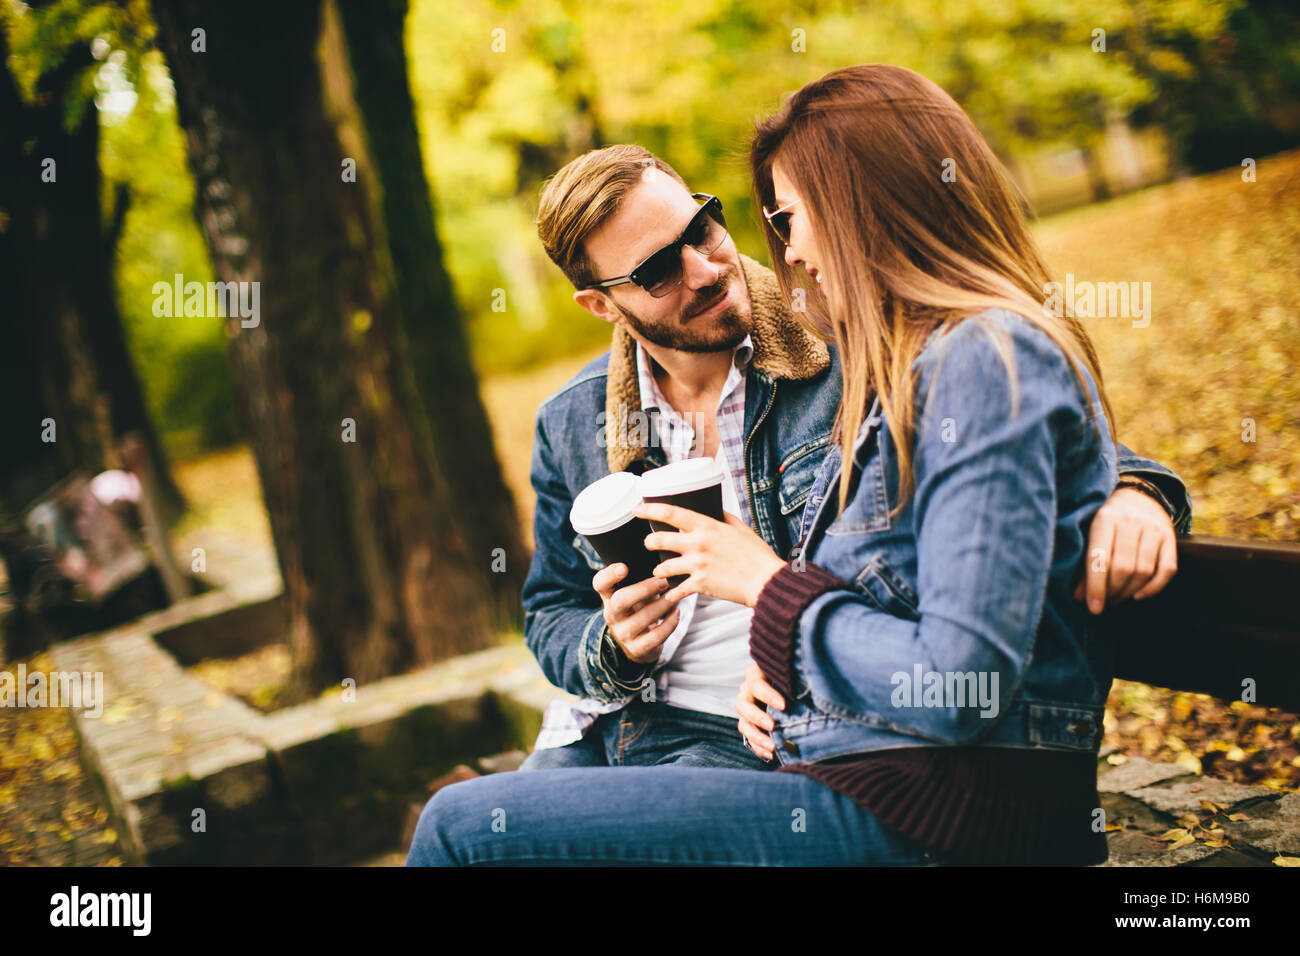 Young loving couple on a bench in autumn park and holding coffee to go in the hands Stock Photo